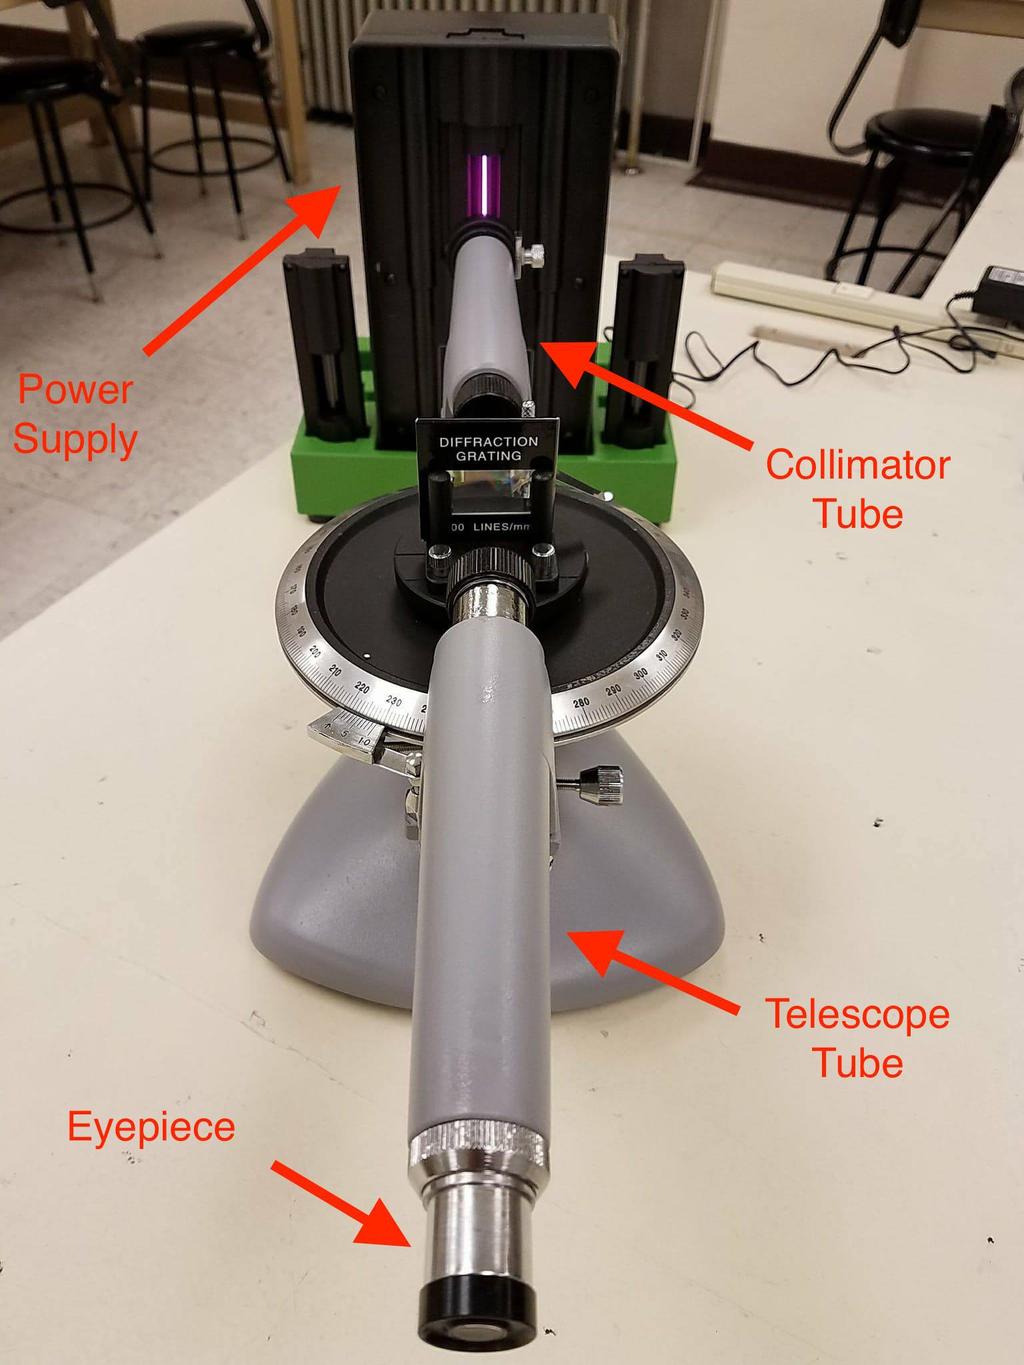 5 b. First, align the Collimator Tube (CT) with the Telescope Tube (TT), which can swivel, so that they make a straight line.